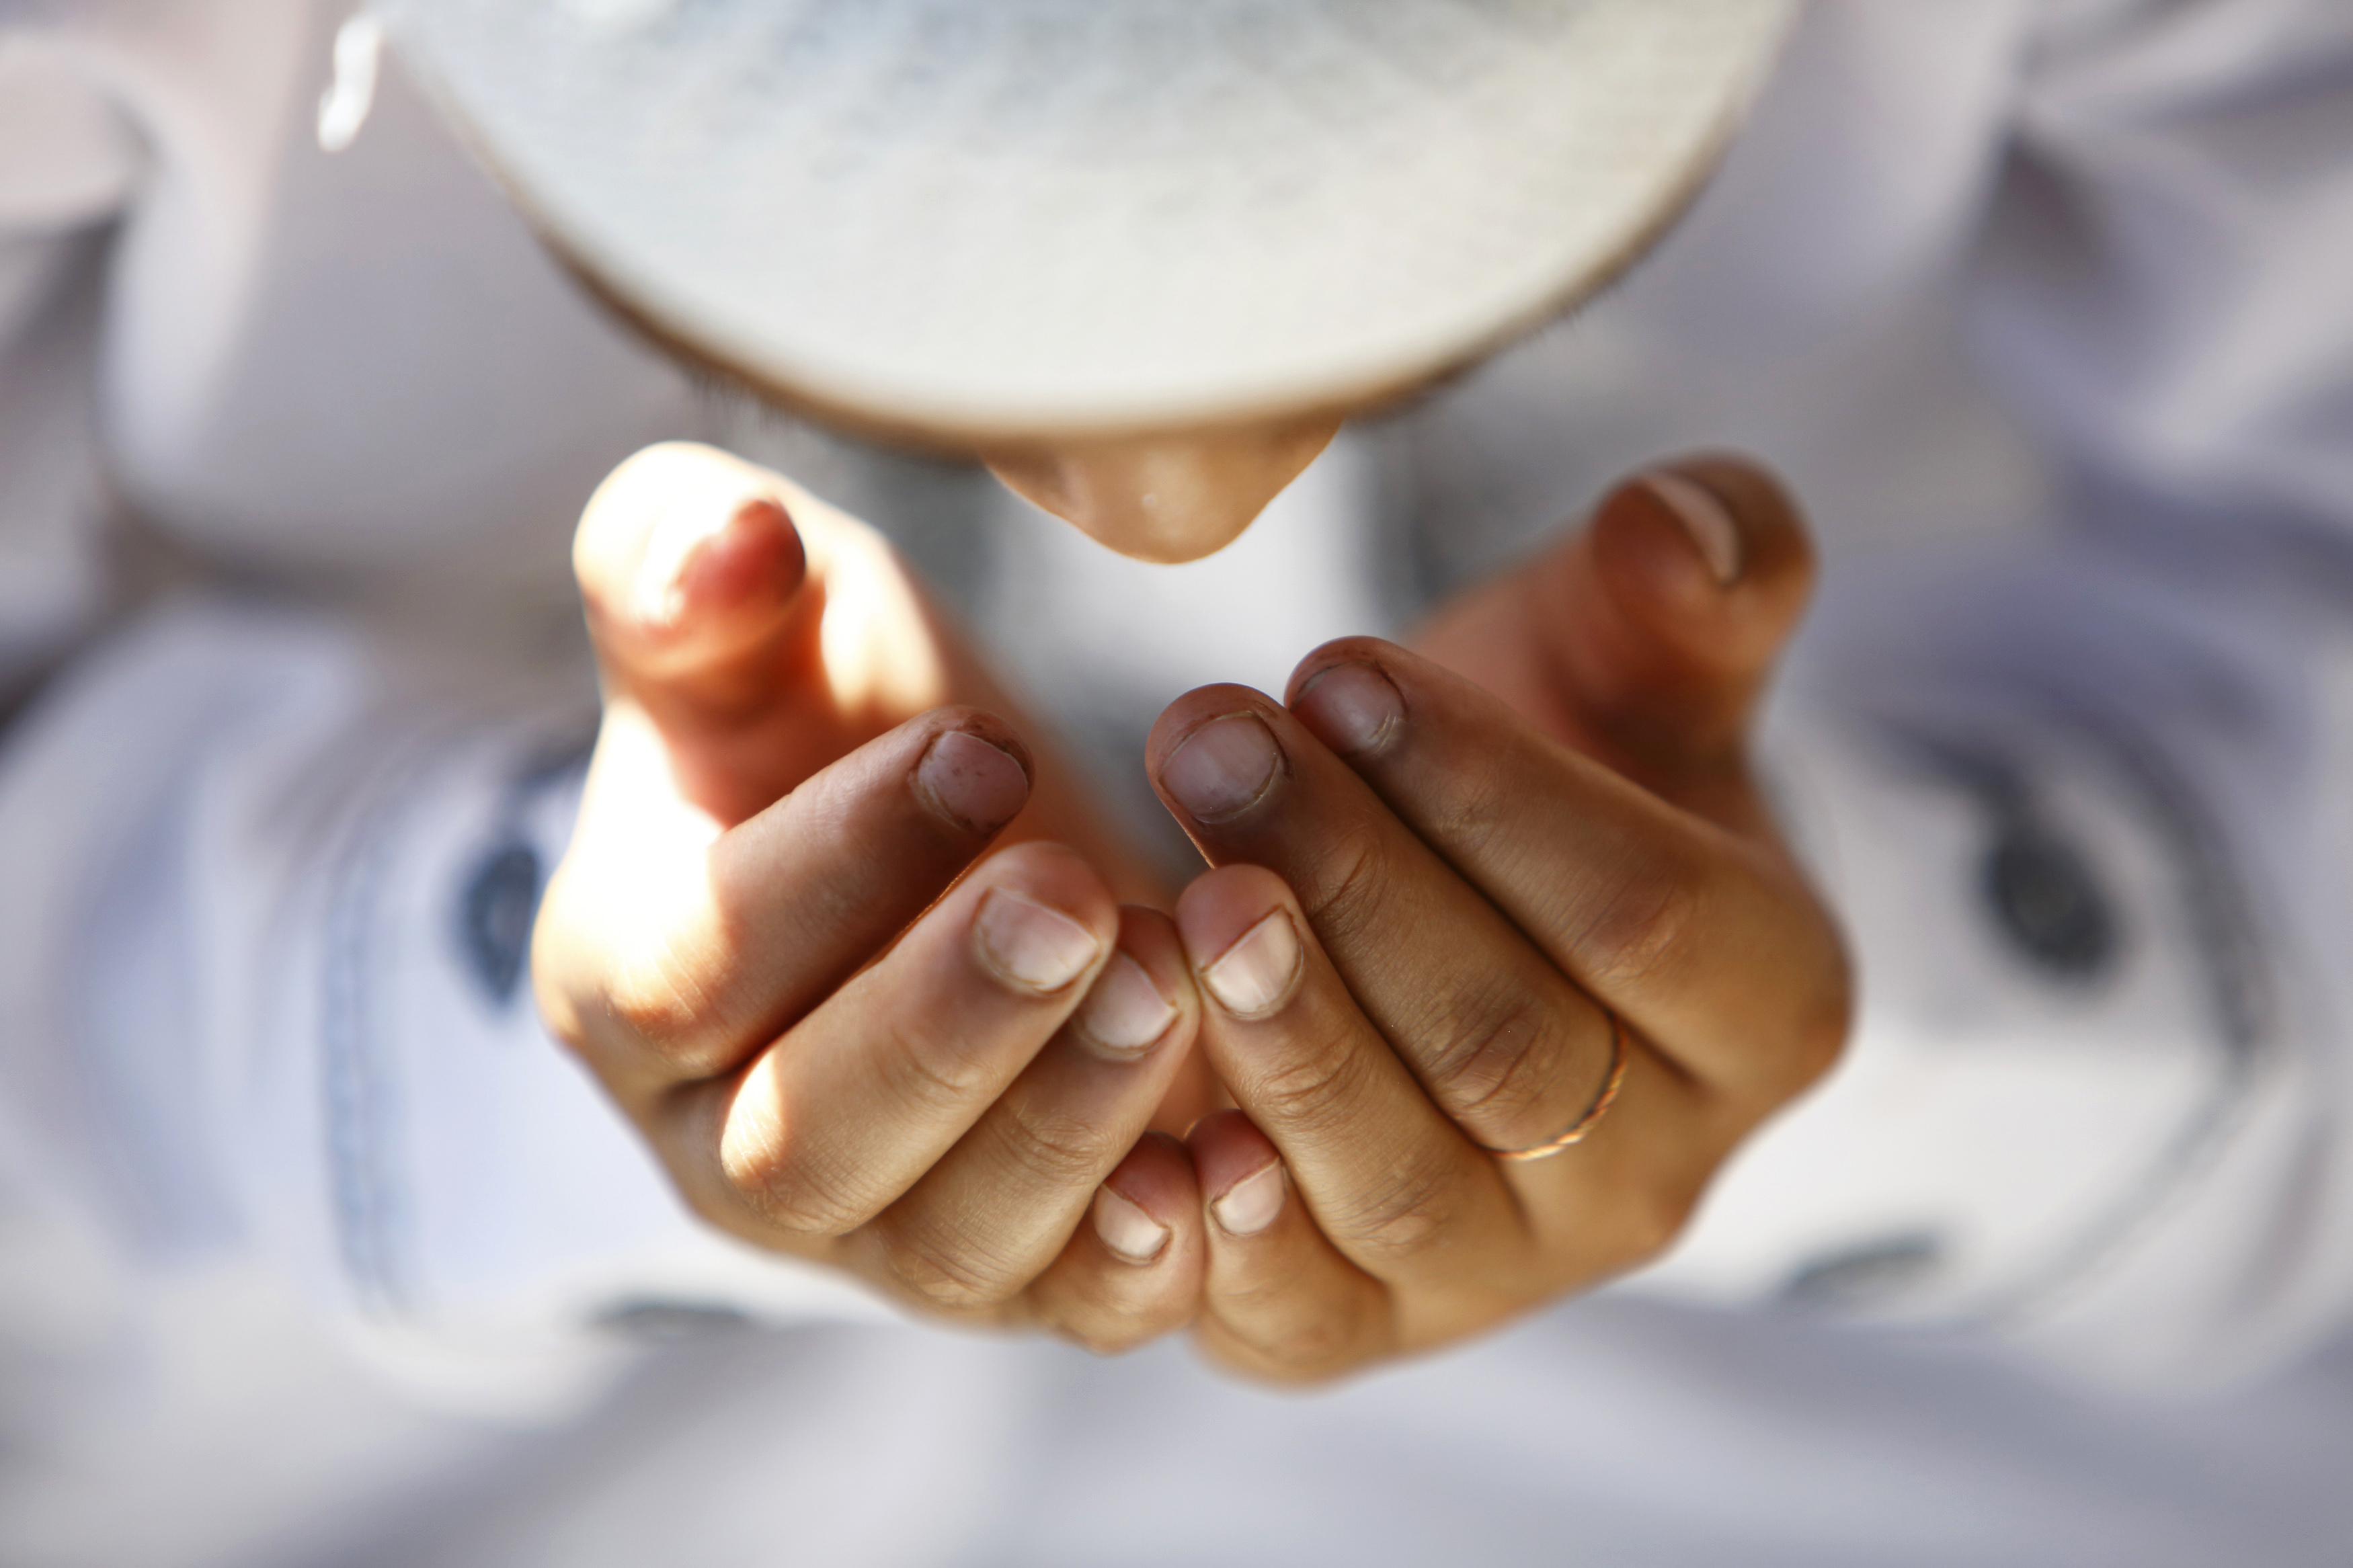 7 Hints Help Us in Our Journey of Becoming Better Muslims